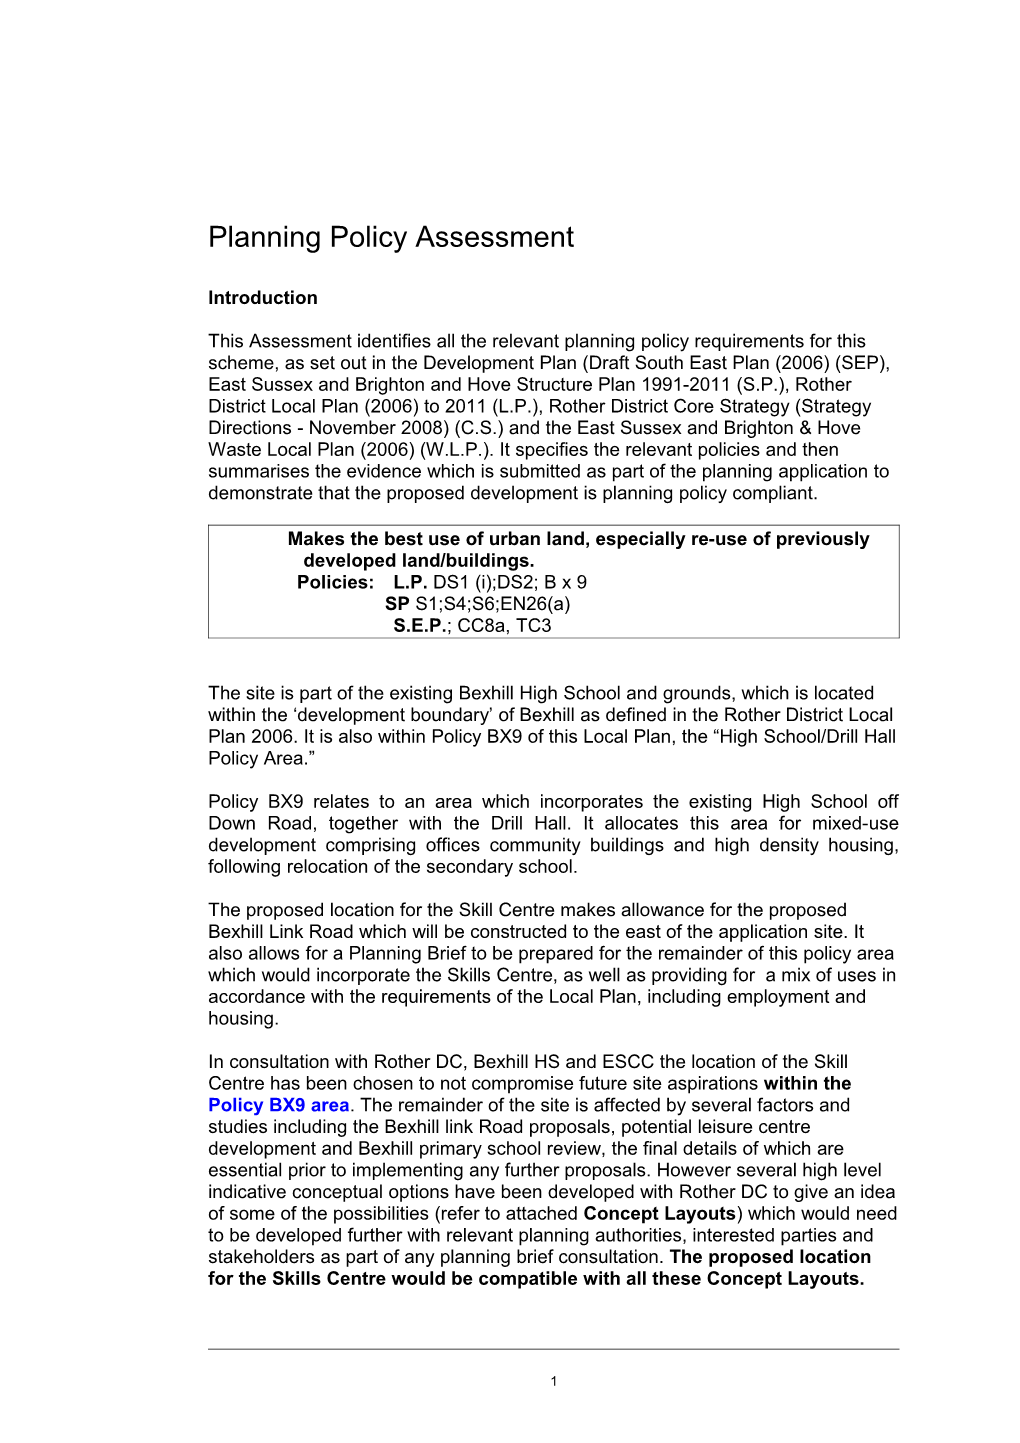 Planning Policy Assessment (Final Draft - 11.02.09)